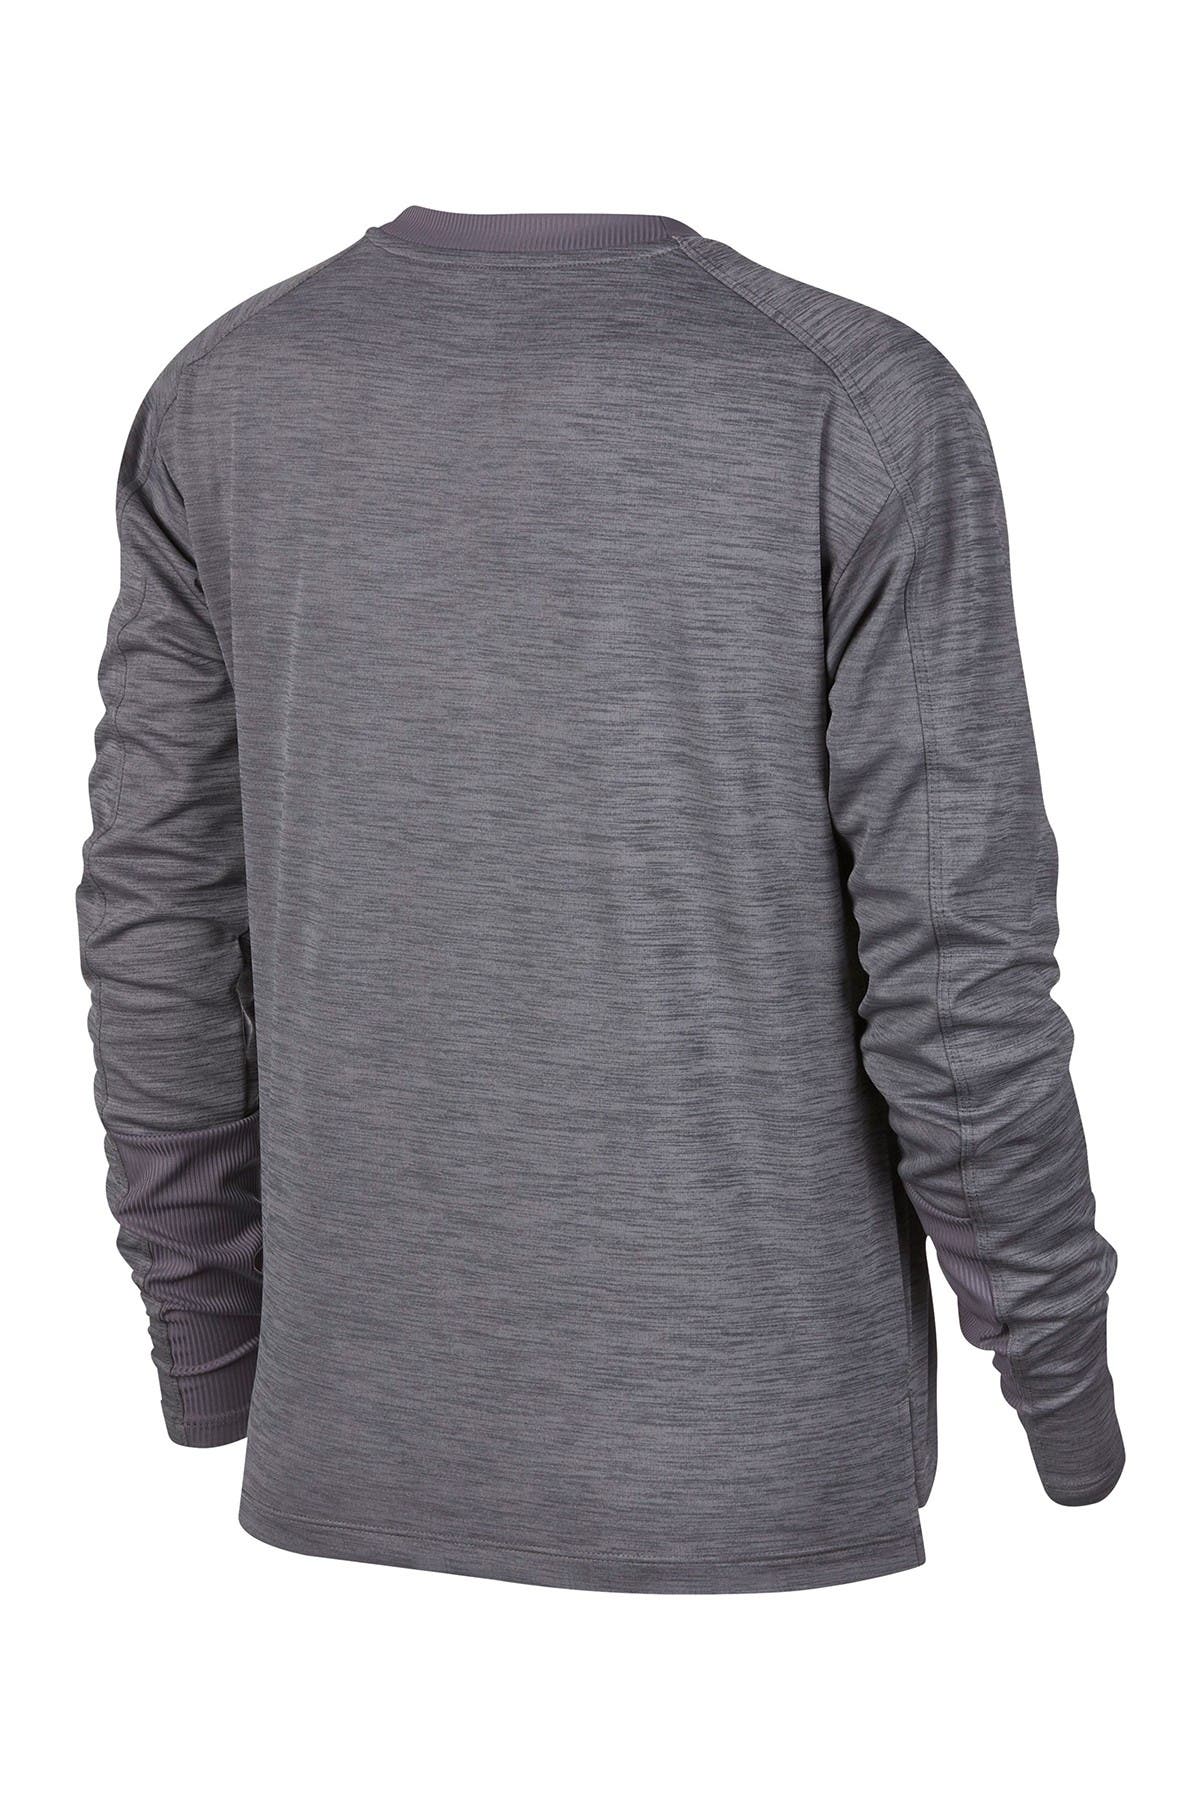 Nike | Pacer Dri-FIT Thumbhole Running Pullover | Nordstrom Rack